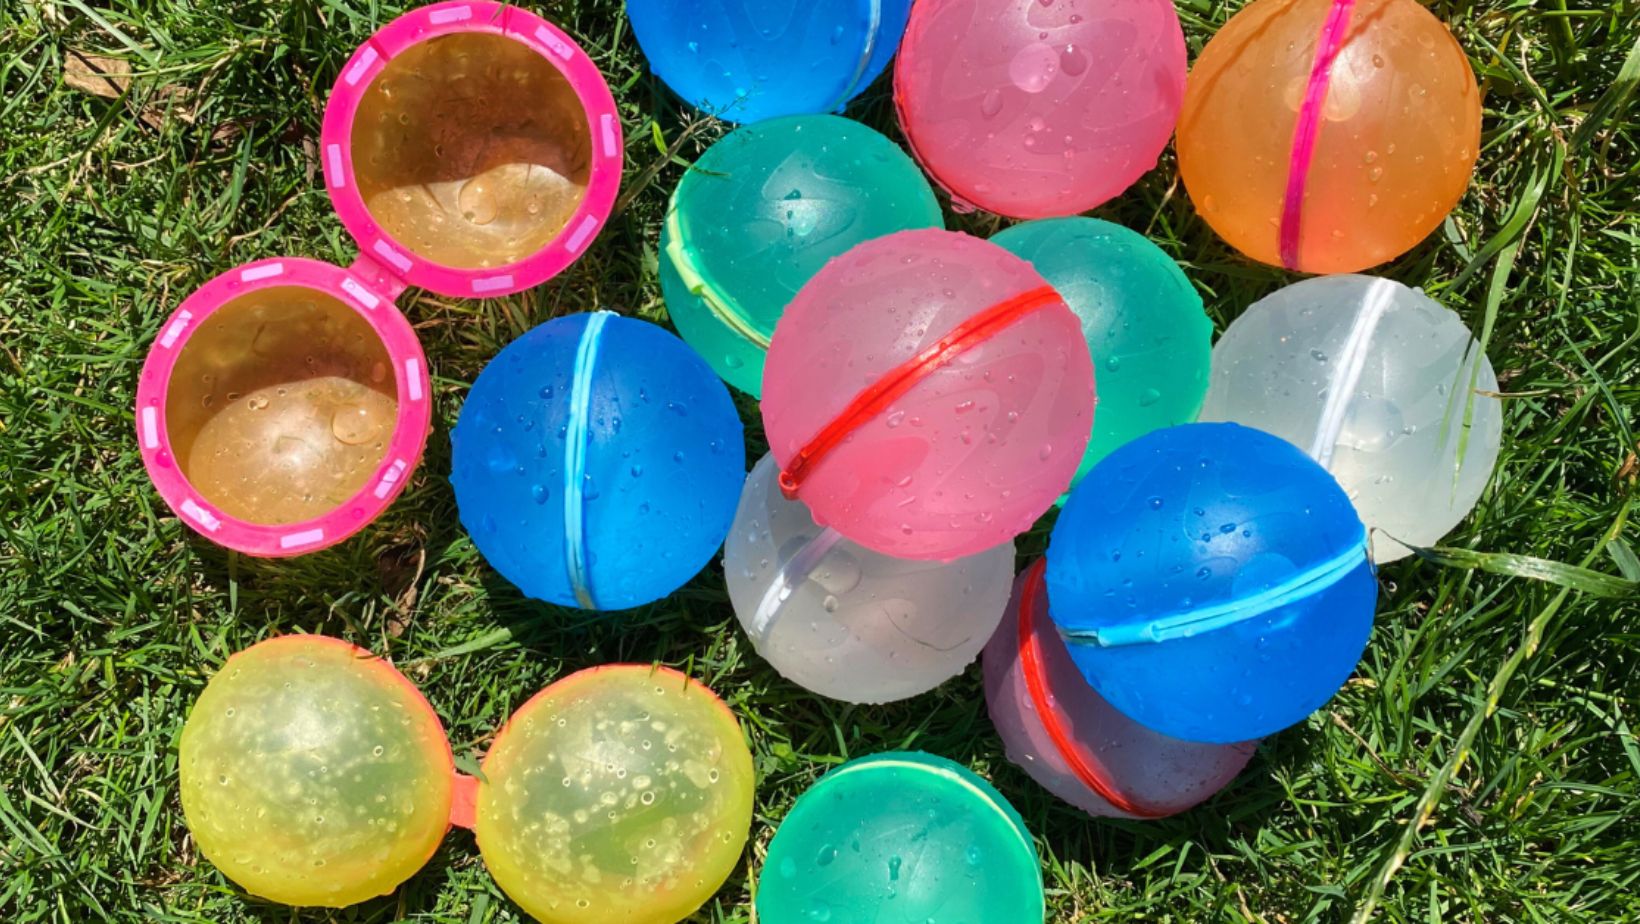 What Are Self-Sealing Reusable Water Balloons?